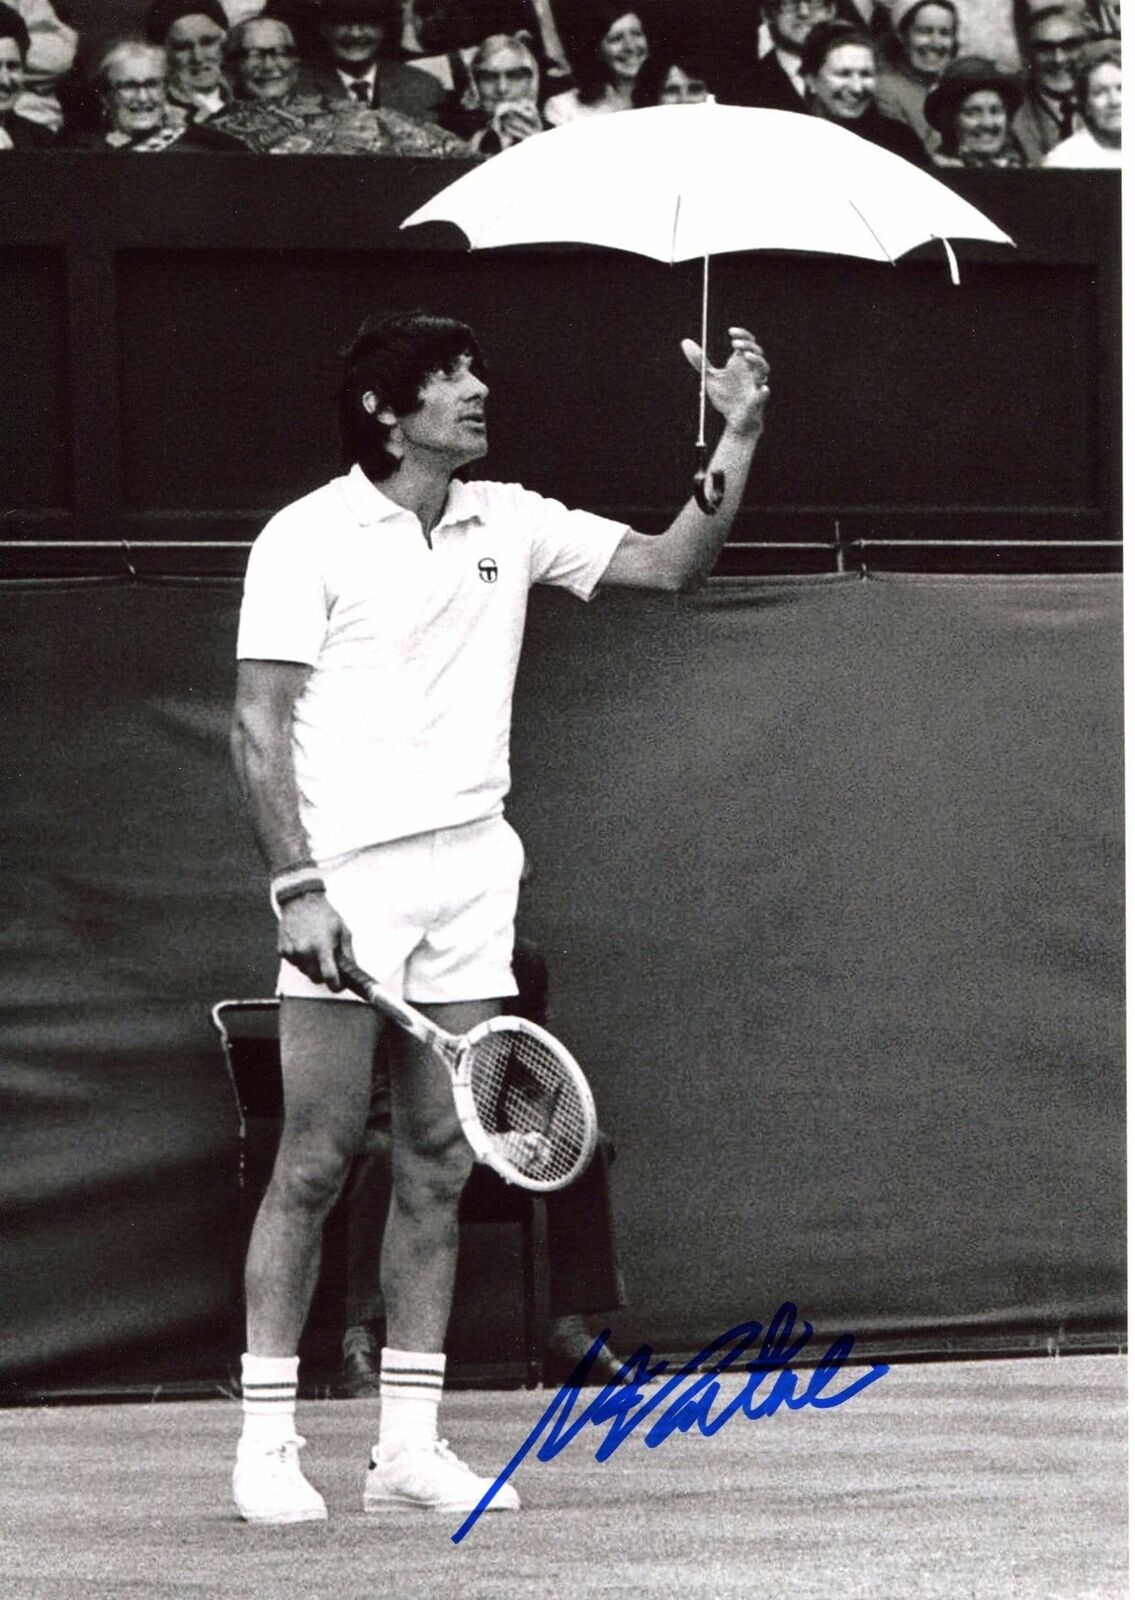 Ilie N?stase TENNIS WORLD No 1 autograph, IP signed Photo Poster painting